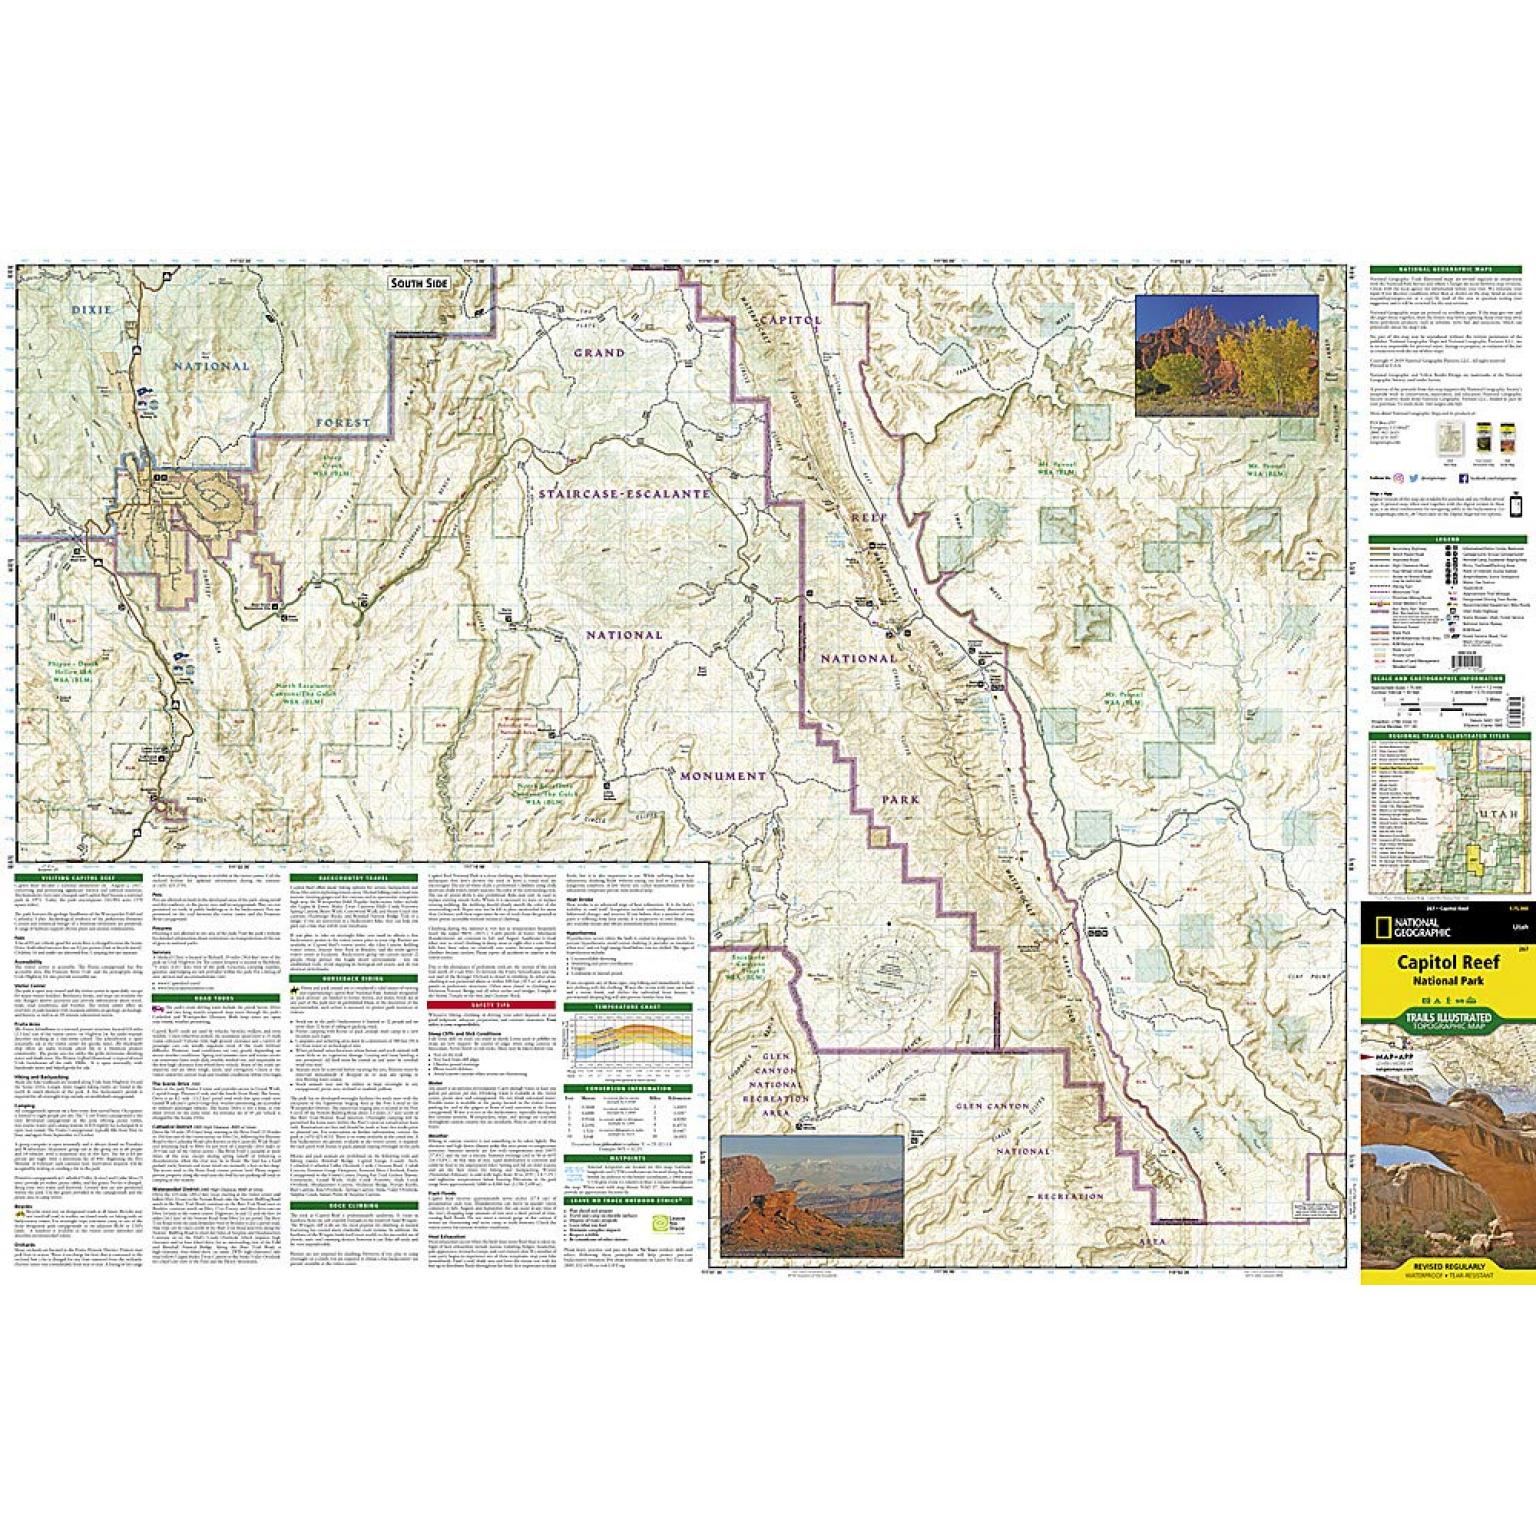 National Capitol Reef National - Trails Illustrated Folding Travel Map - The Map